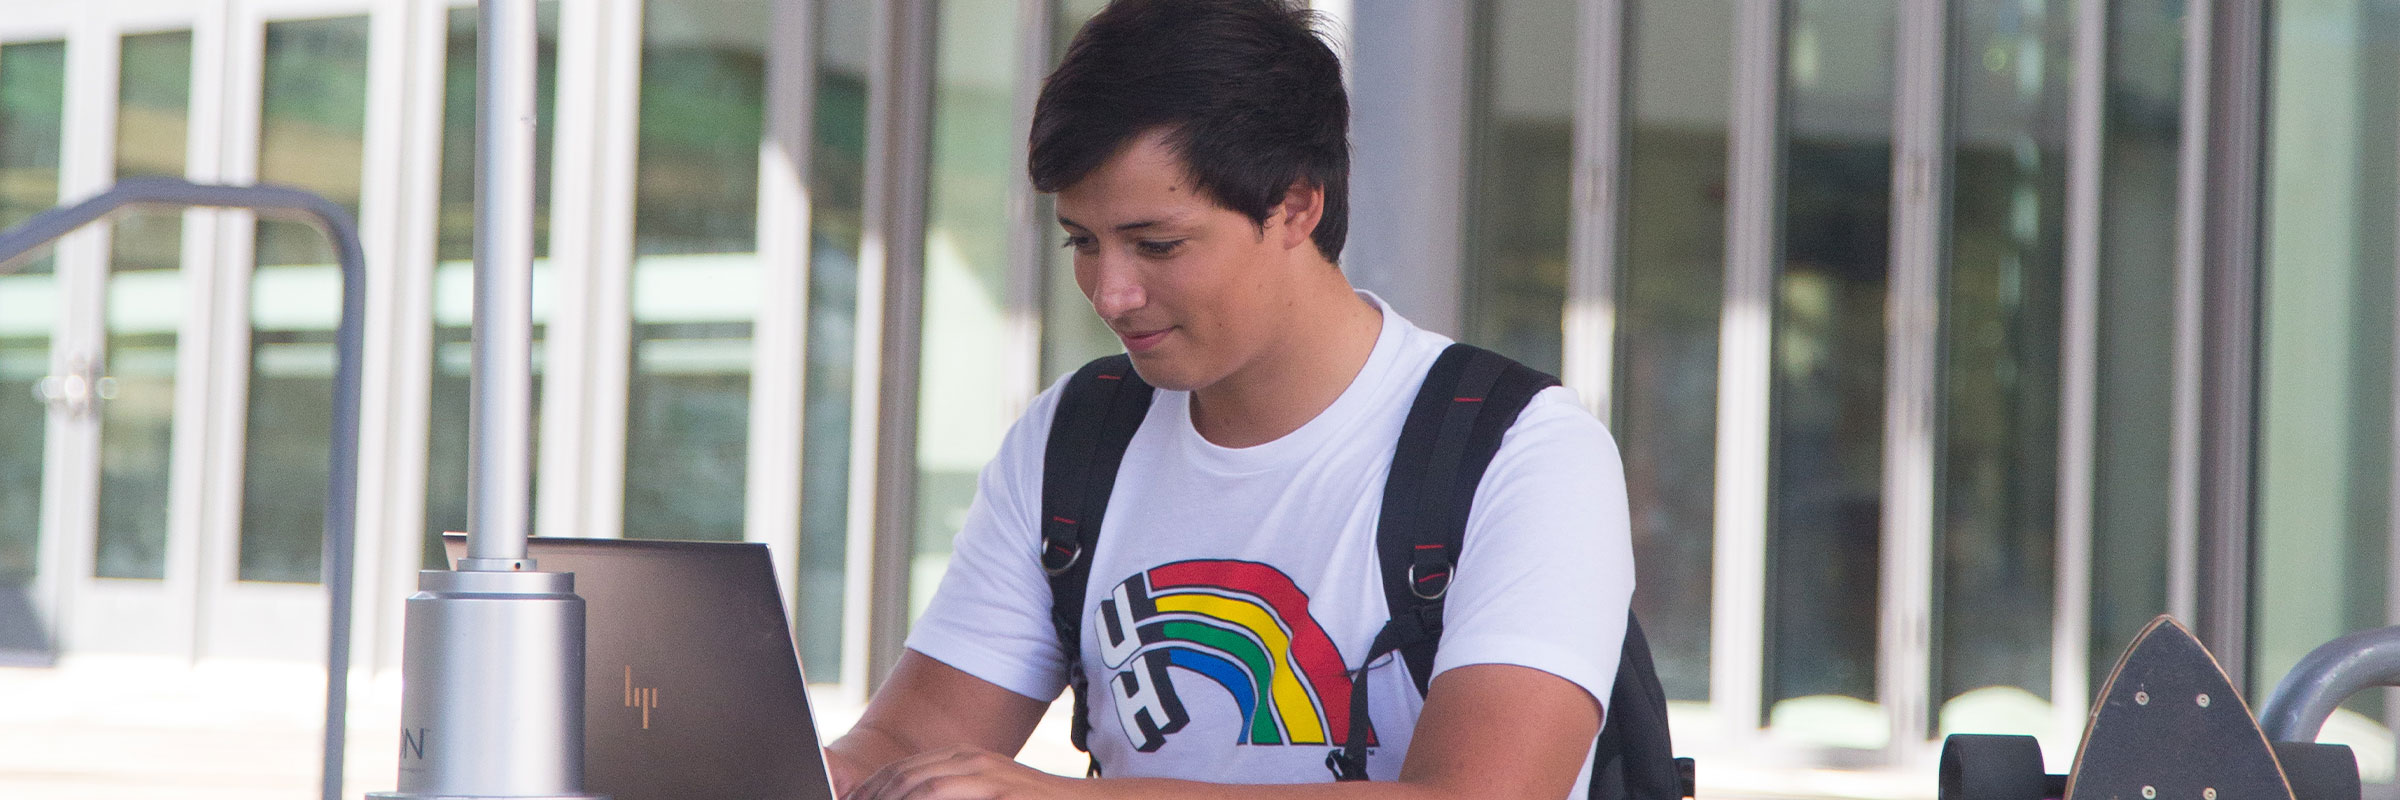 A male student in University of Hawaii T-shirt sitting at a court yard and looking at his computer with a smile on his face